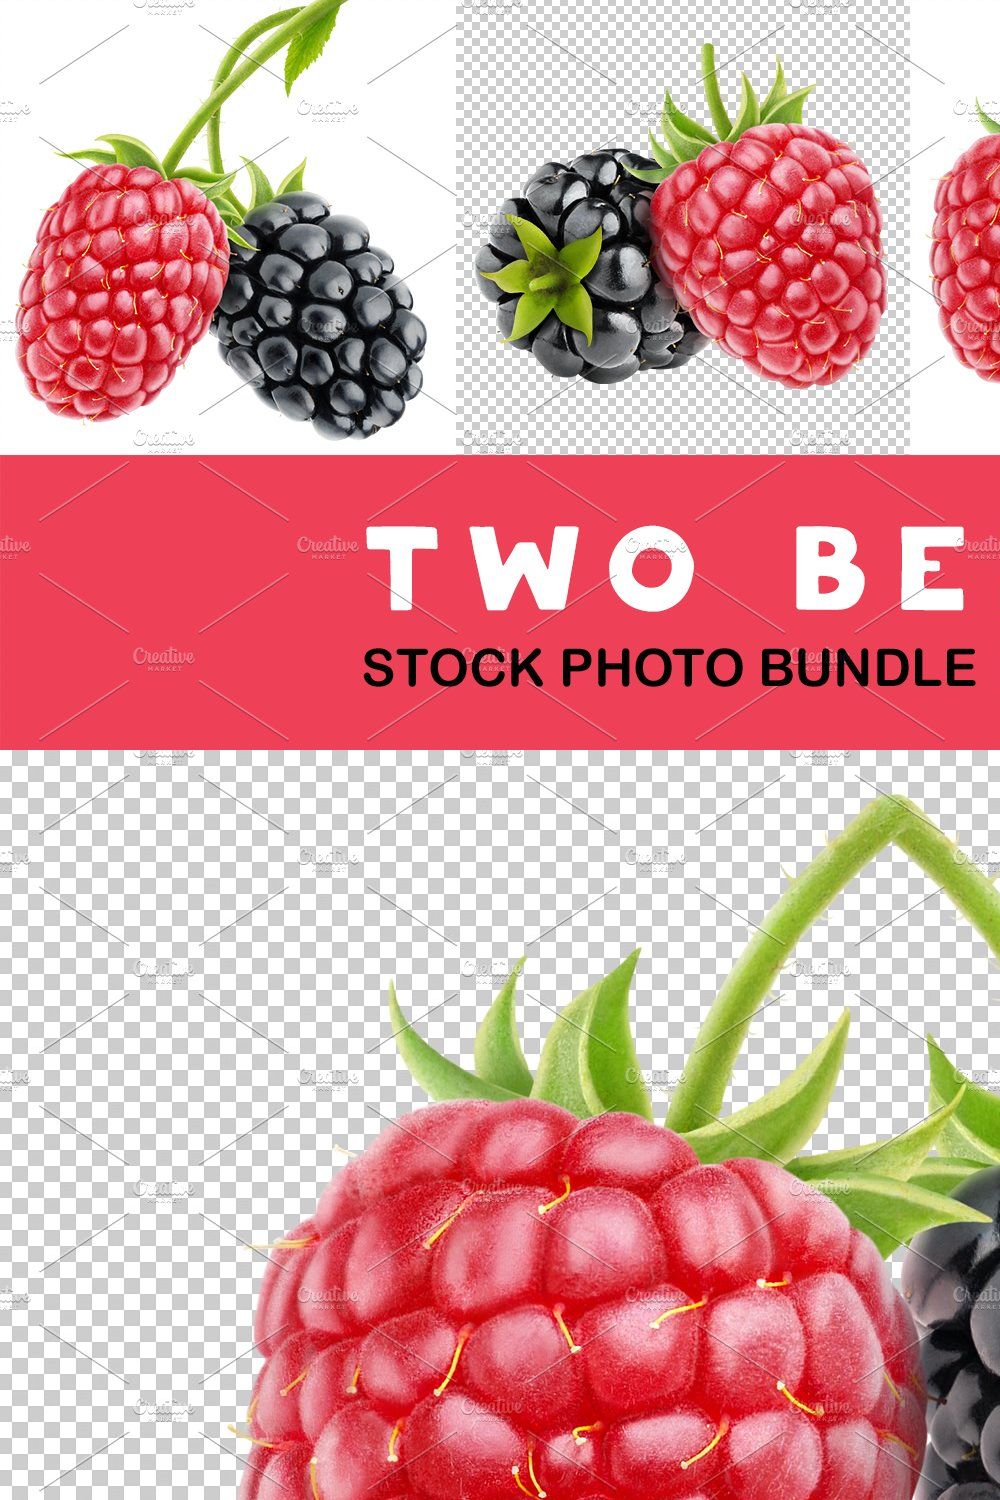 Blackberry and raspberry pinterest preview image.